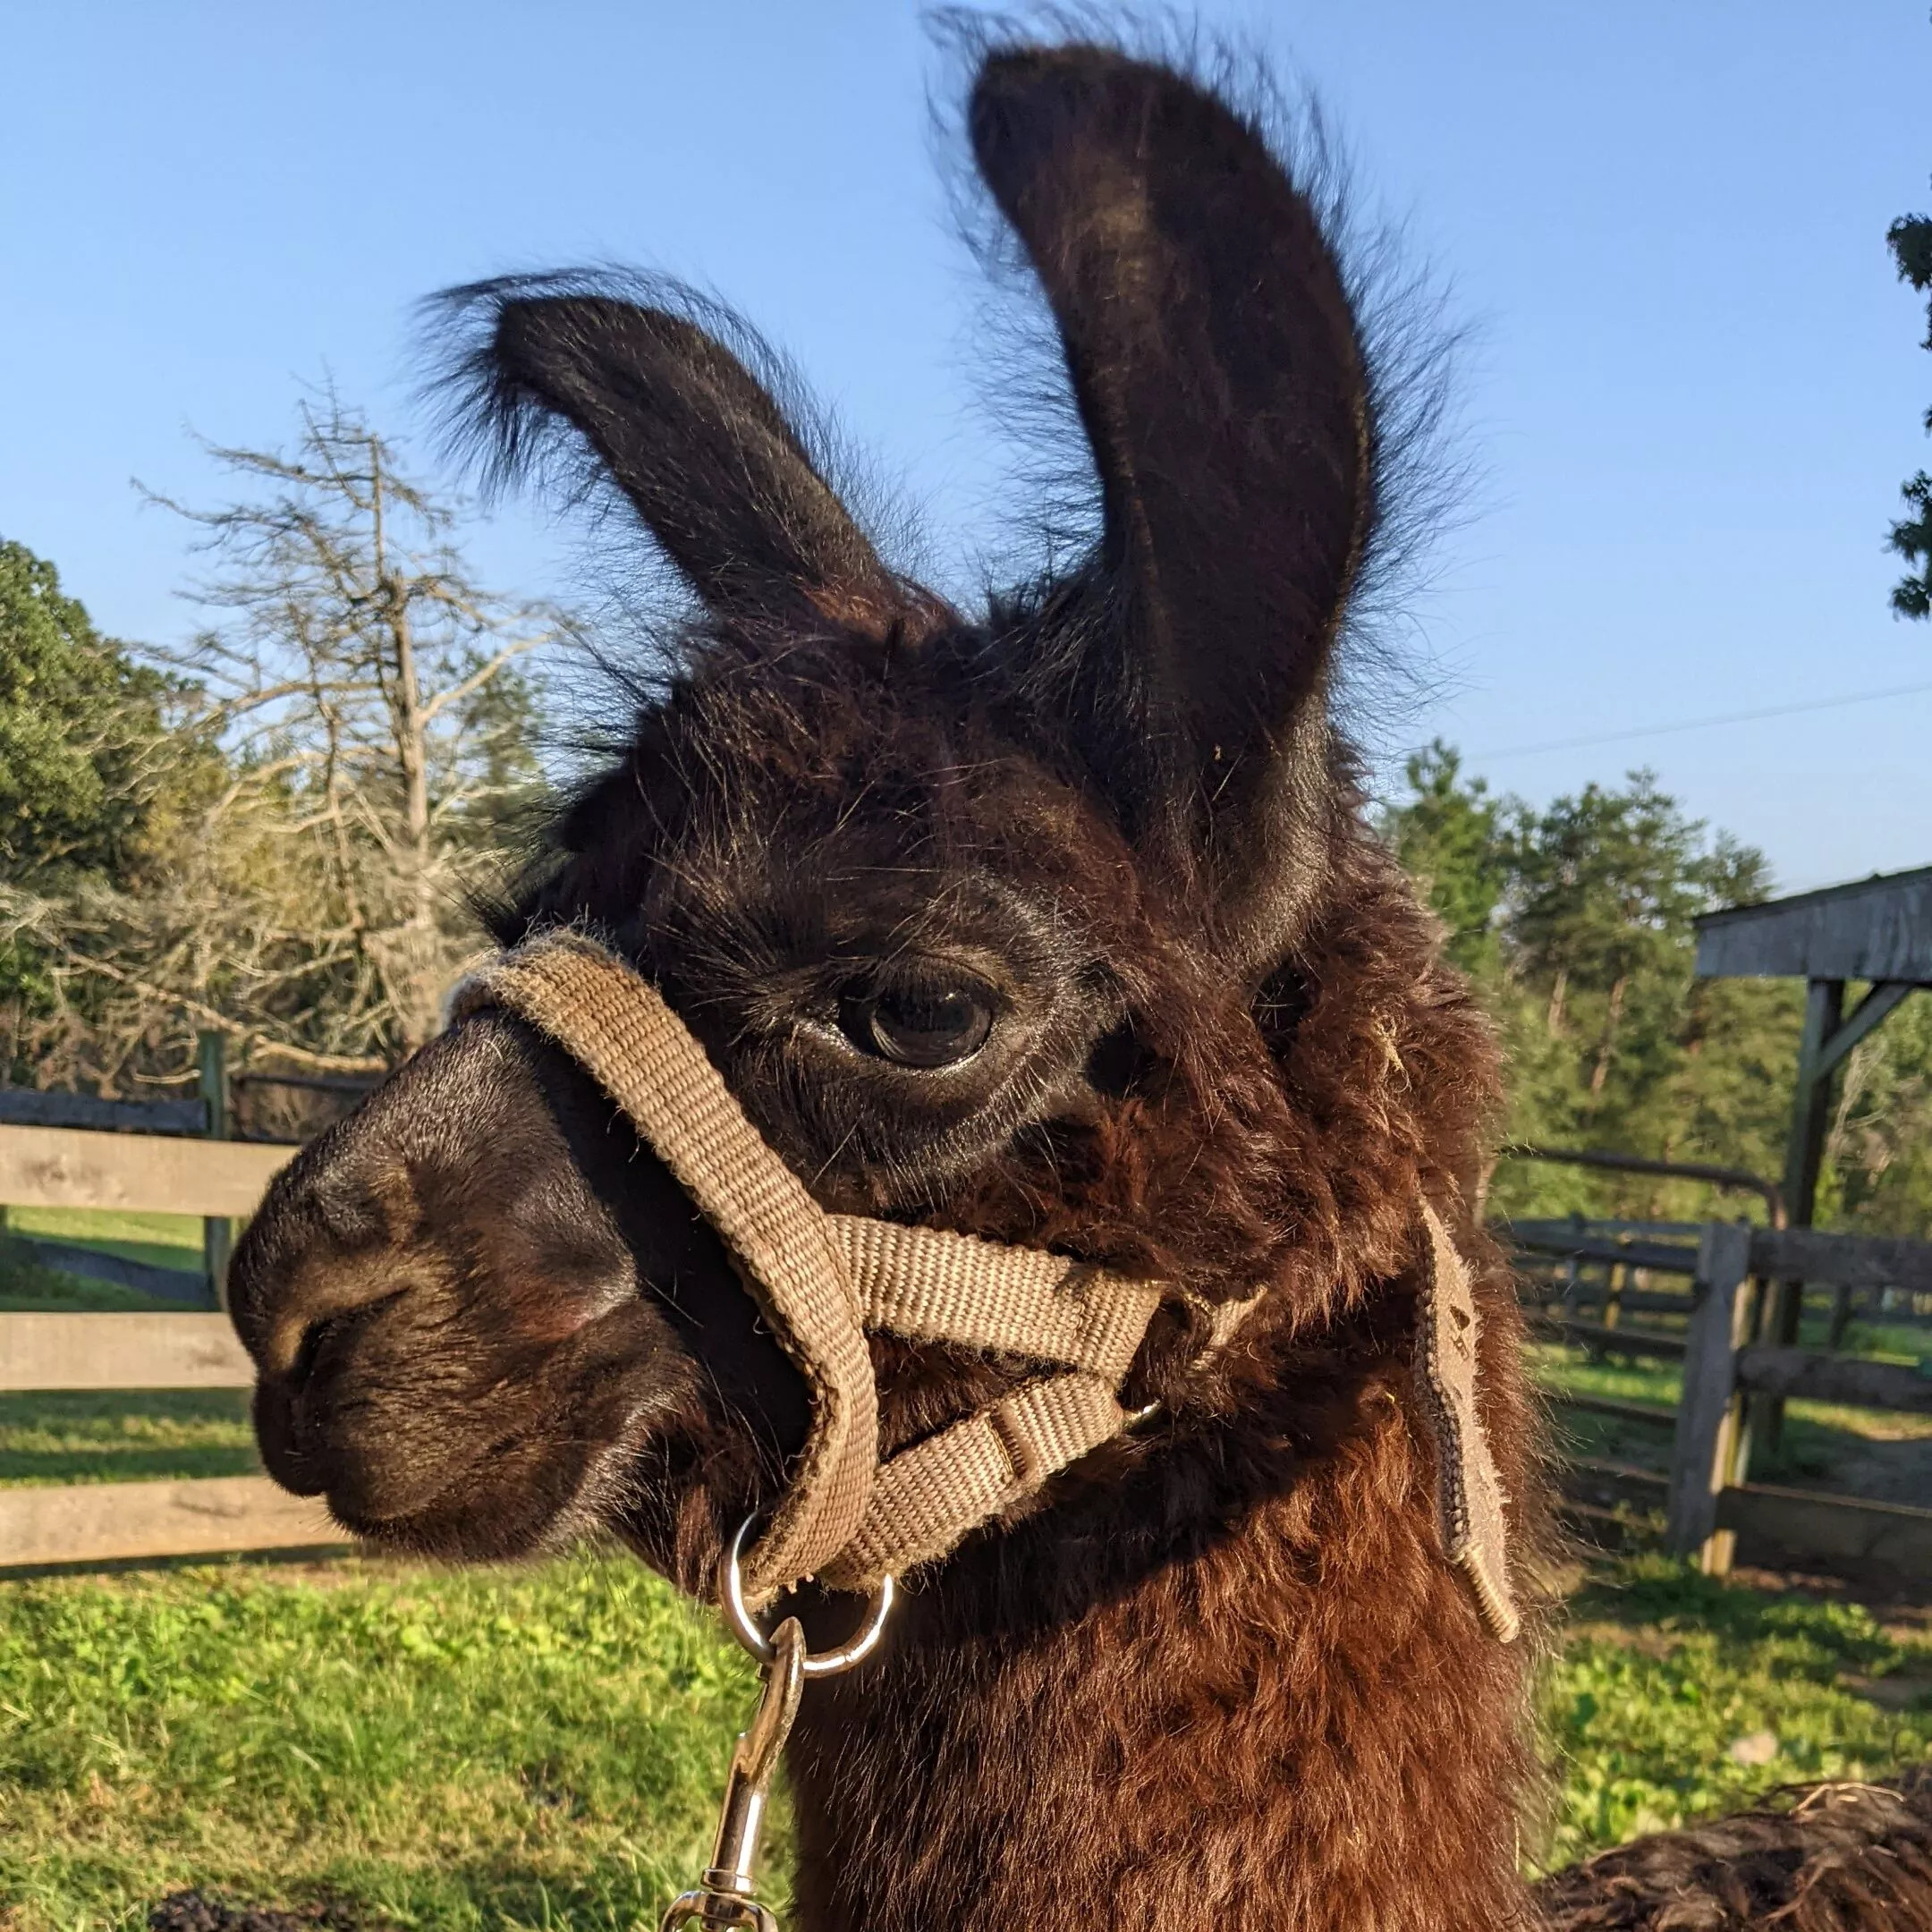 An image of a llama named Tonks during her halter training